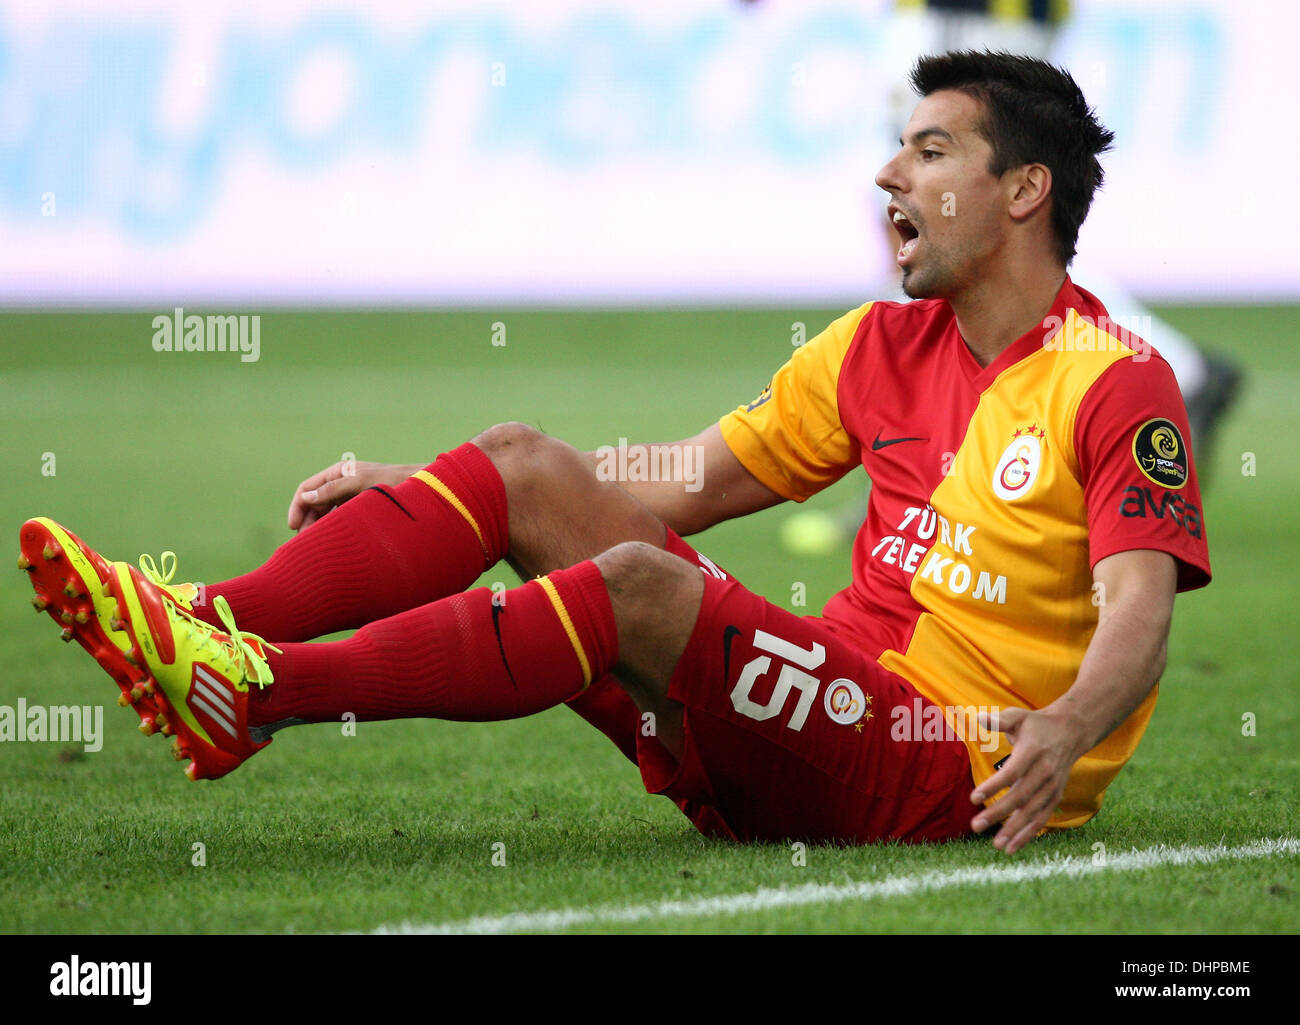 Milan Baros Turkish Super Lig (Super League) - Fenerbahce v Galatasaray -  held at Sukru Saracoglu Stadium Galatasaray are crowned champions after a  goalless draw with arch-rivals Fenerbahce. The stadium descended into